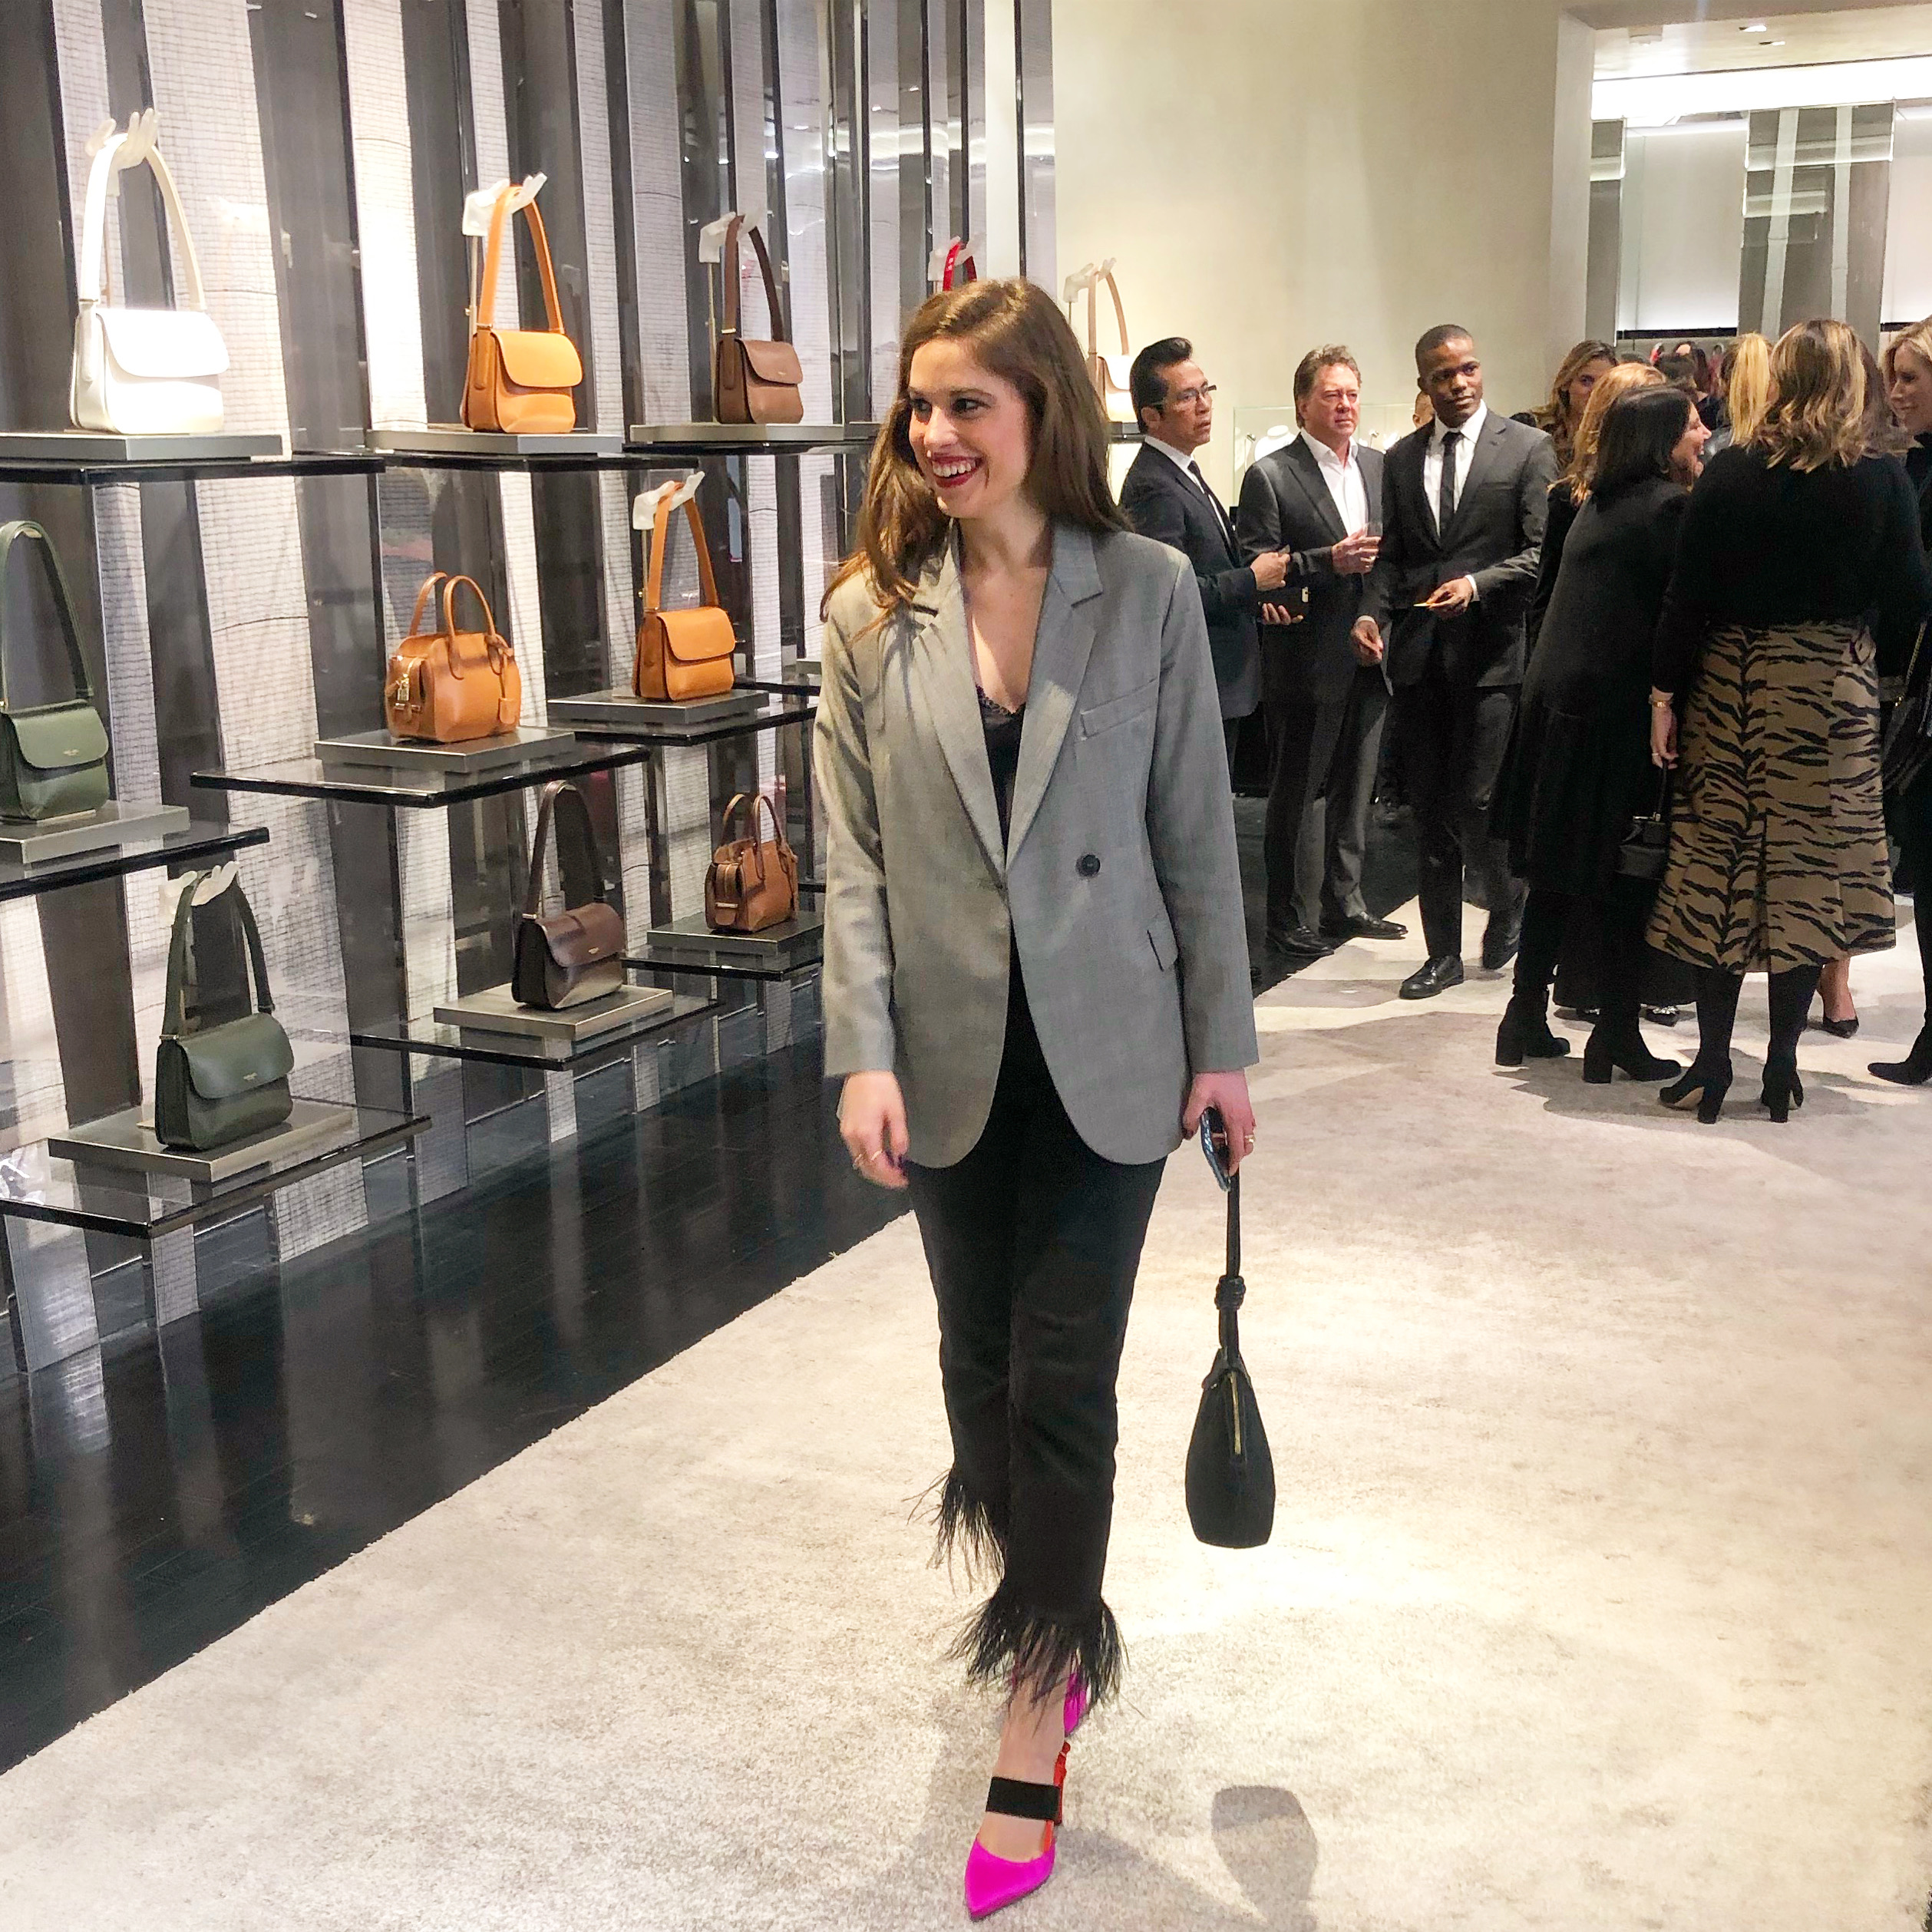 Woman walking through a store wearing a grey blazer, jeans with feathers, a black purse and pink shoes